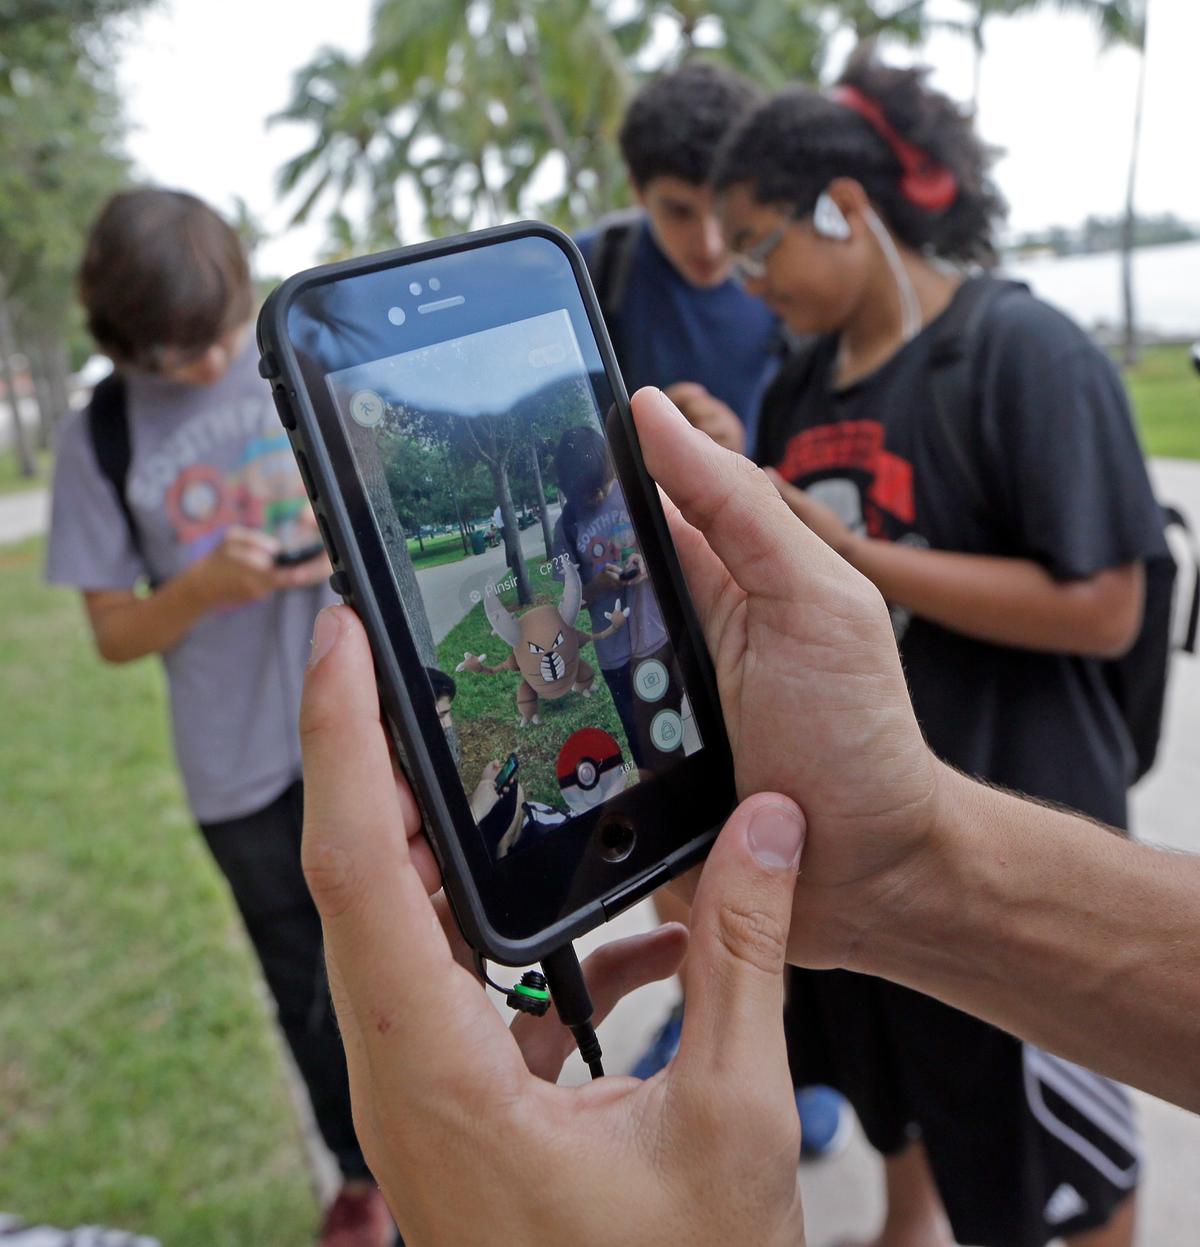 Pokemon Players Are Trespassing, Risking Arrest or Worse